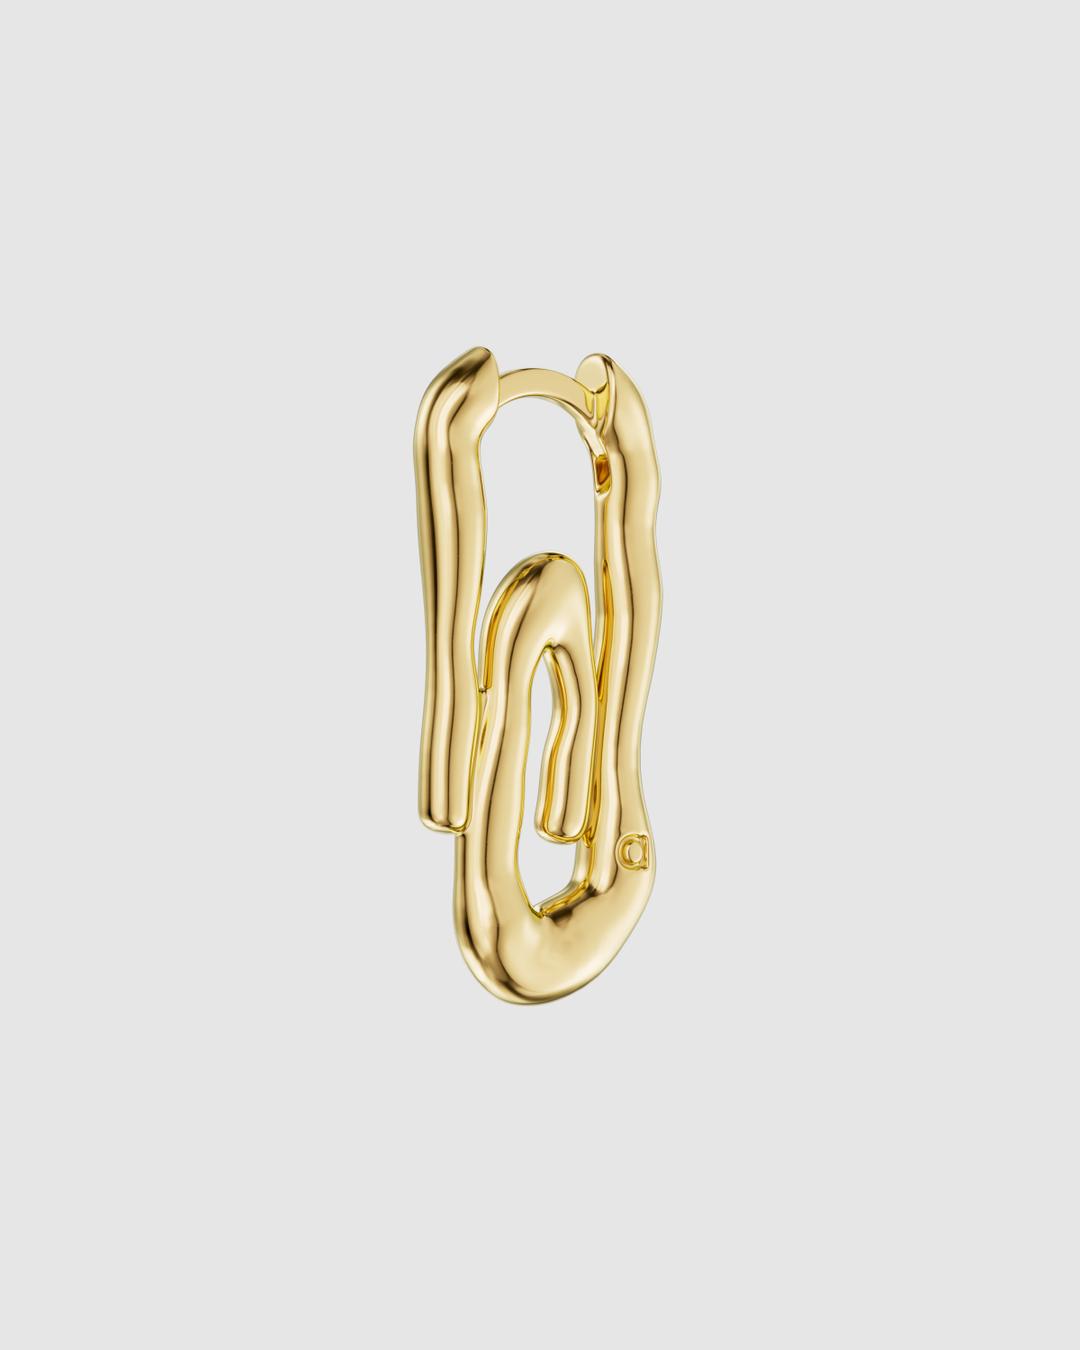 New Nature paper clip earring with gold plating